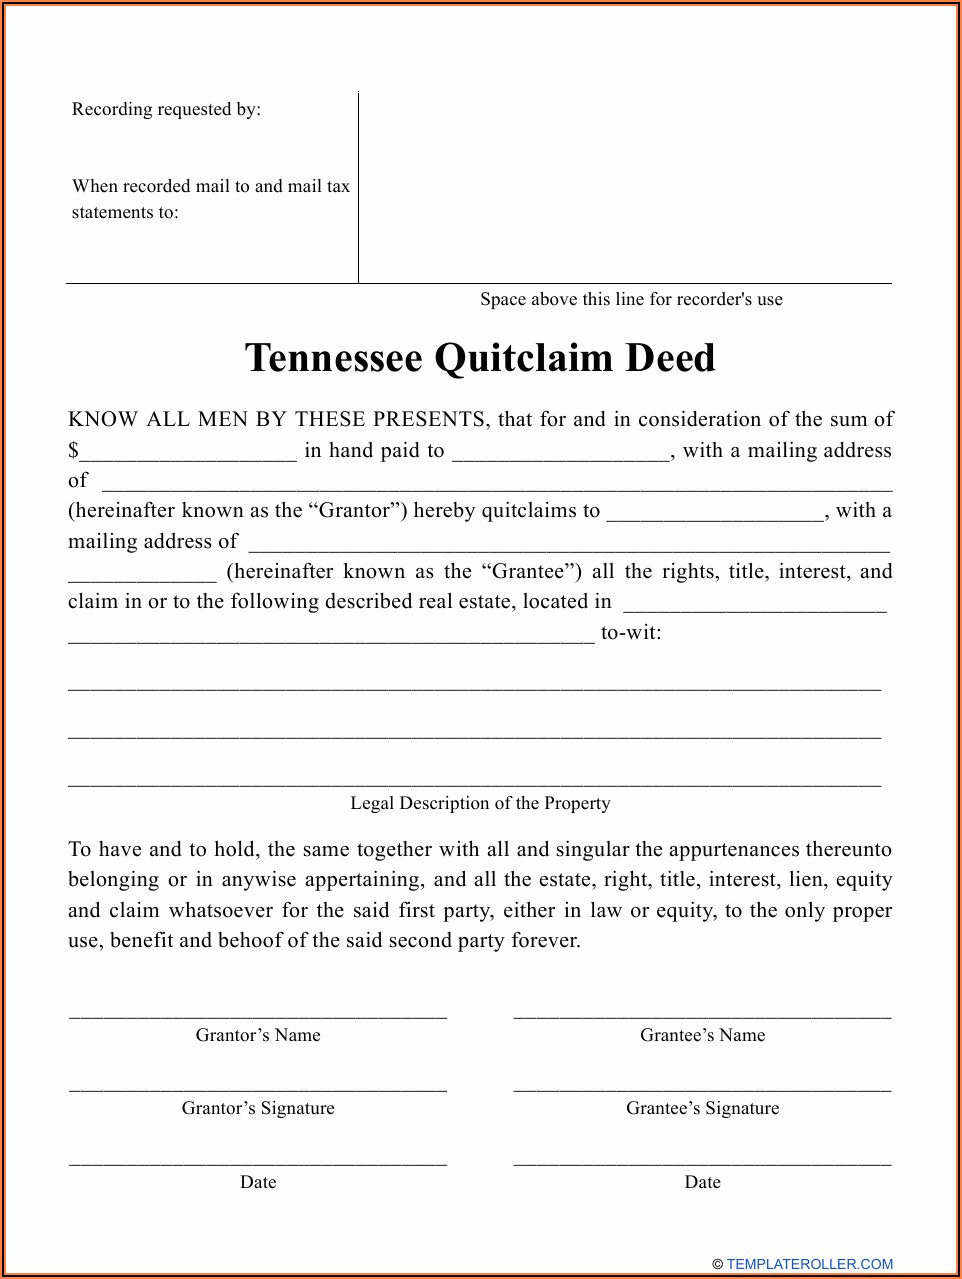 How To Fill Out A Quit Claim Deed Form In Tennessee